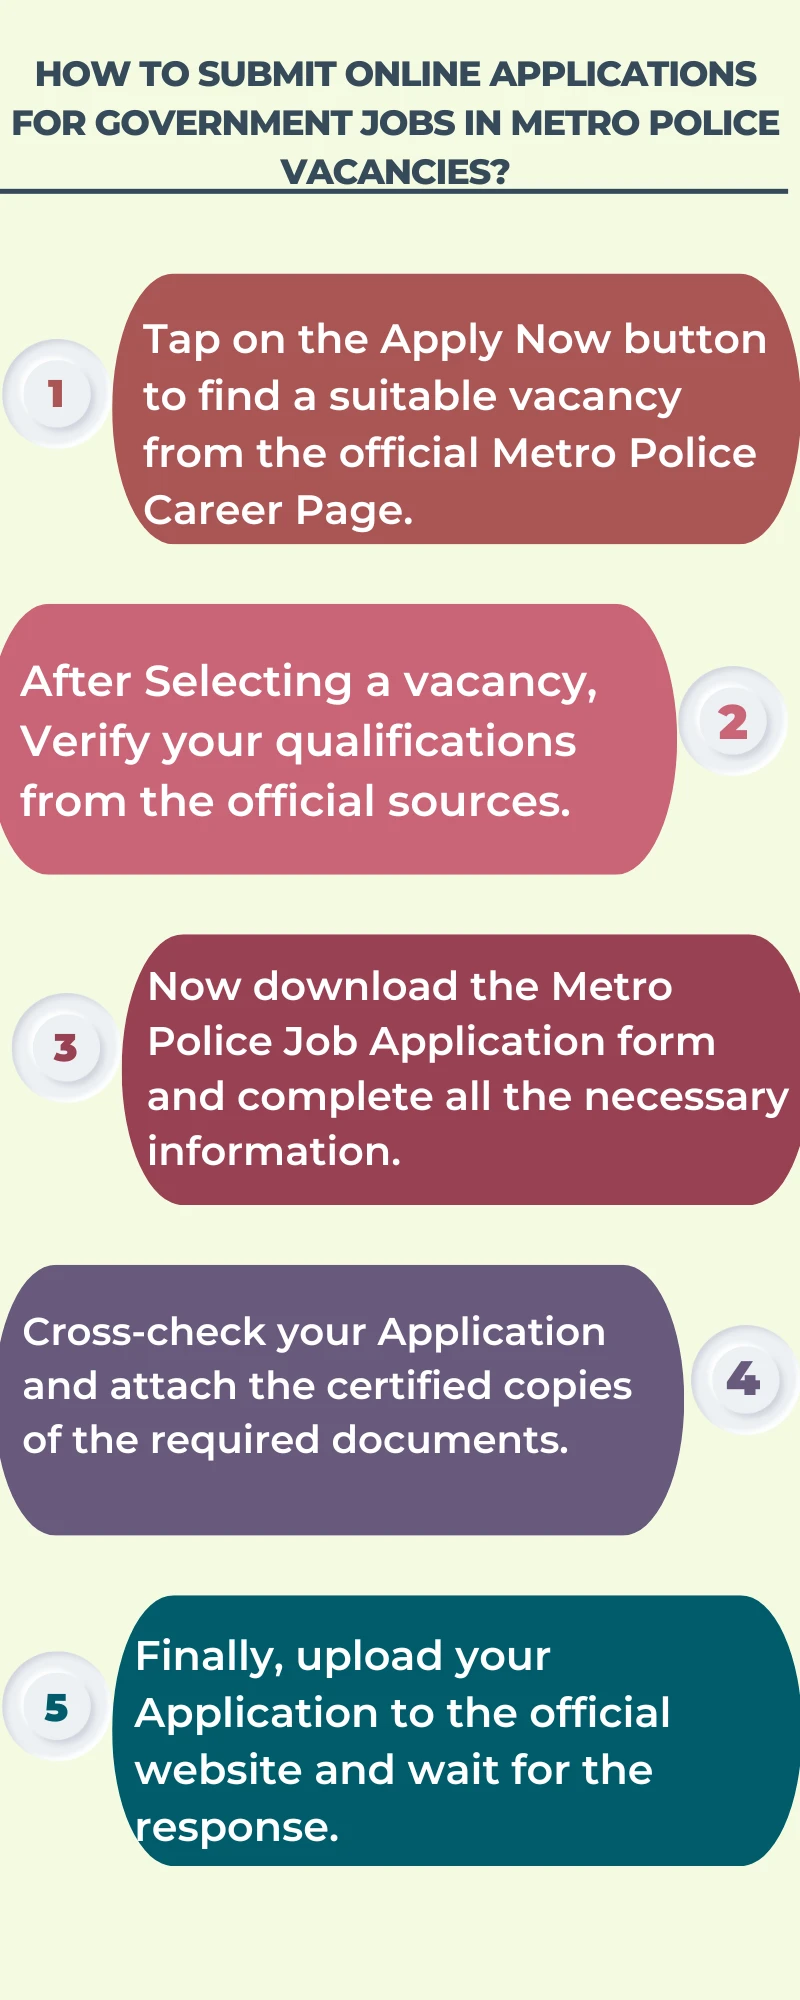 How to submit Online Applications for Government Jobs in Metro Police Vacancies?